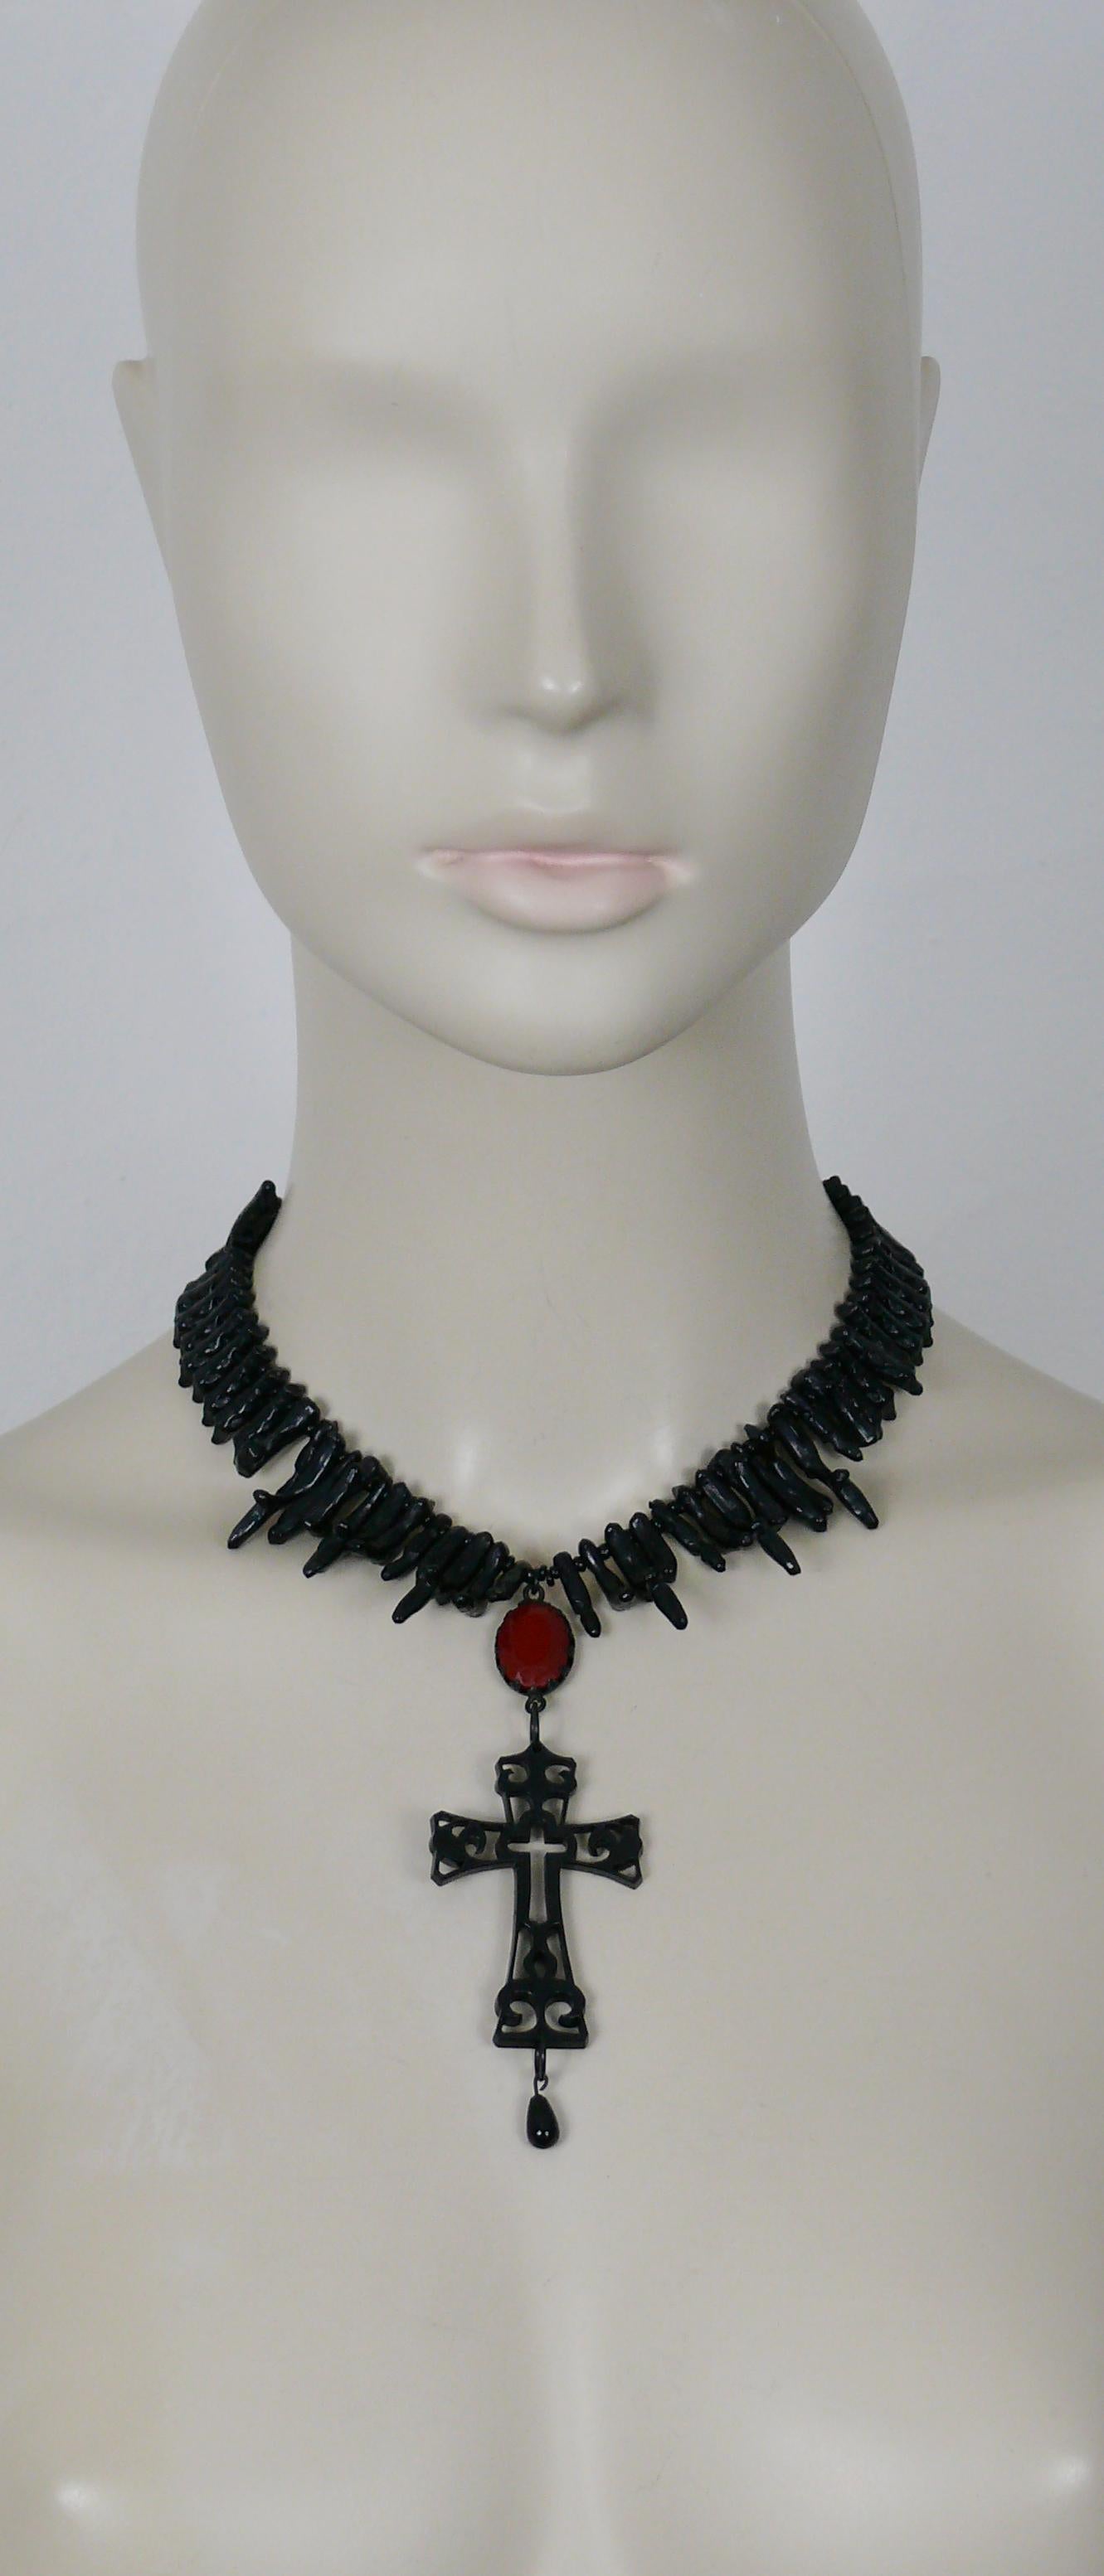 JEAN PAUL GAULTIER gothic black resin necklace featuring a cross pendant.

Lobster clasp closure.

Marked GAULTIER.

Indicative measurements : length approx. 37 cm (14.57 inches).

Material : Resin / Glass / Black tone metal hardware.

NOTES
- This